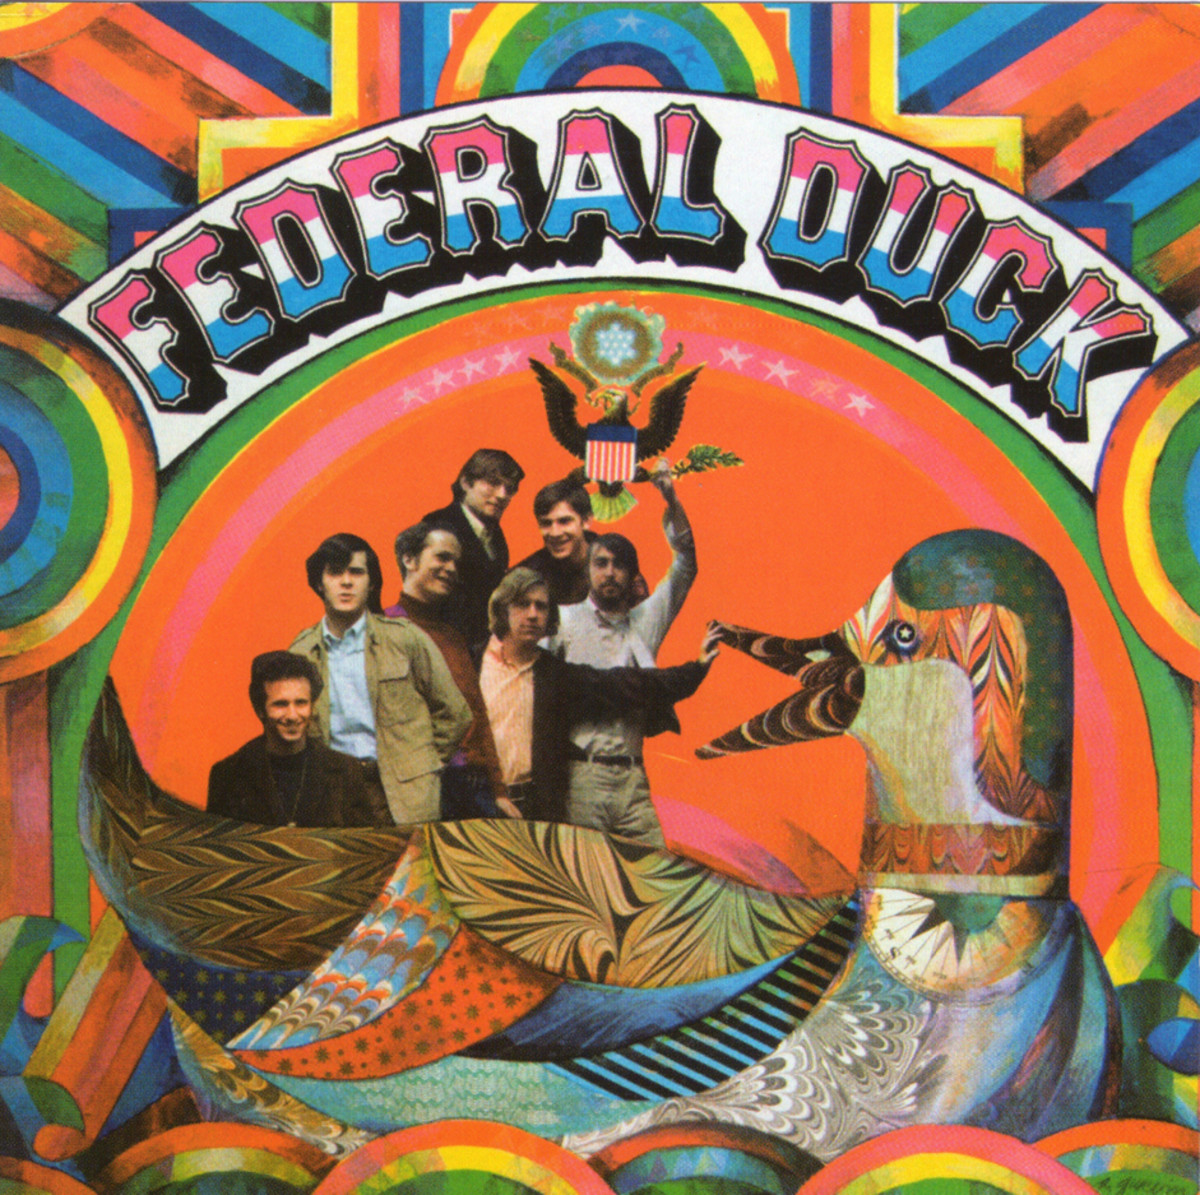 Federal Duck - The Band Profile Pic